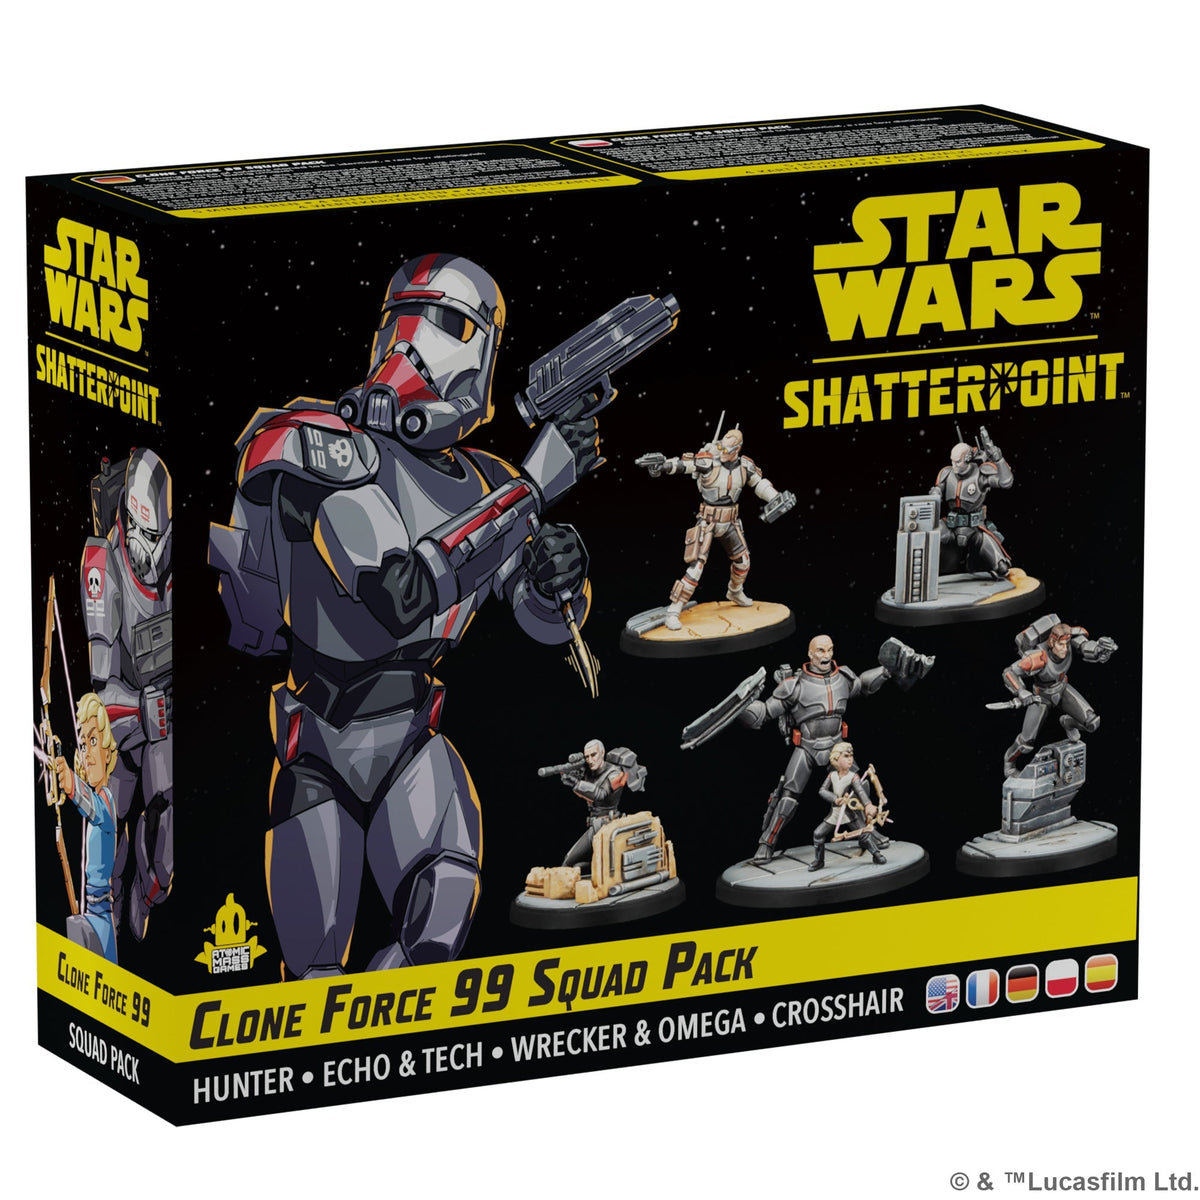 Clone Force 99 Squad Pack (Star Wars: Shatterpoint)